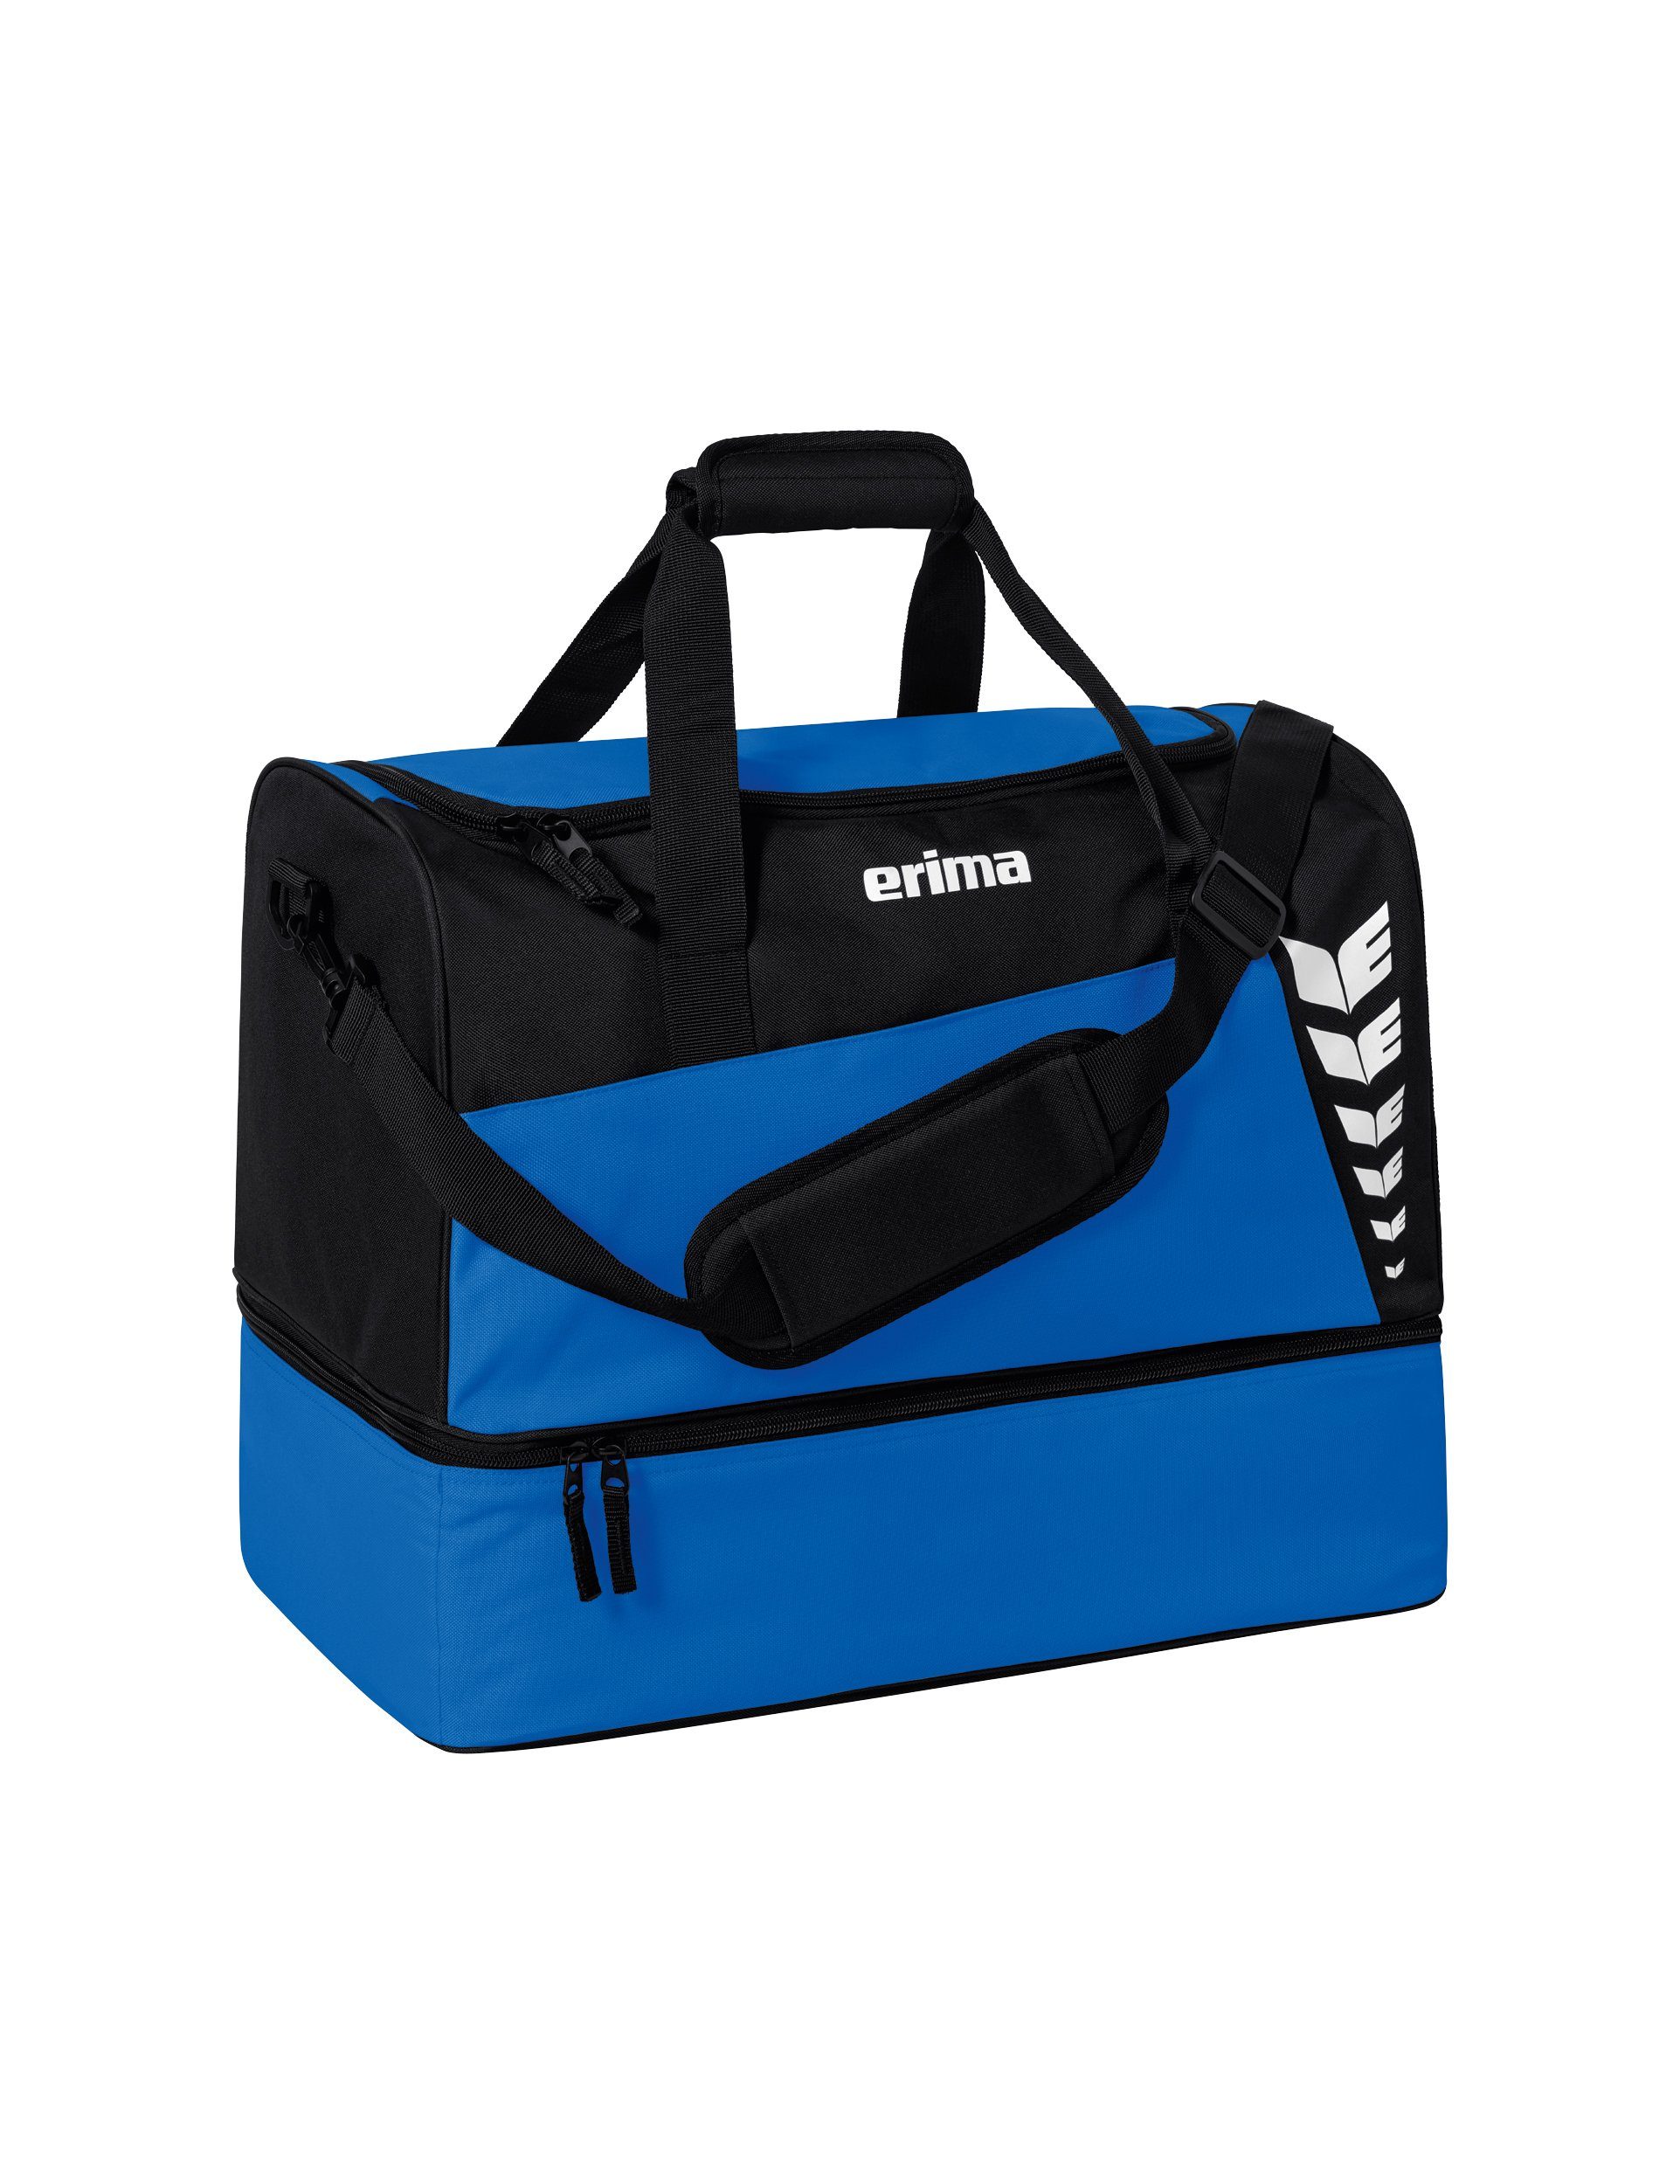 Erima Sporttasche SIX WINGS sportsbag with botto new royal/black